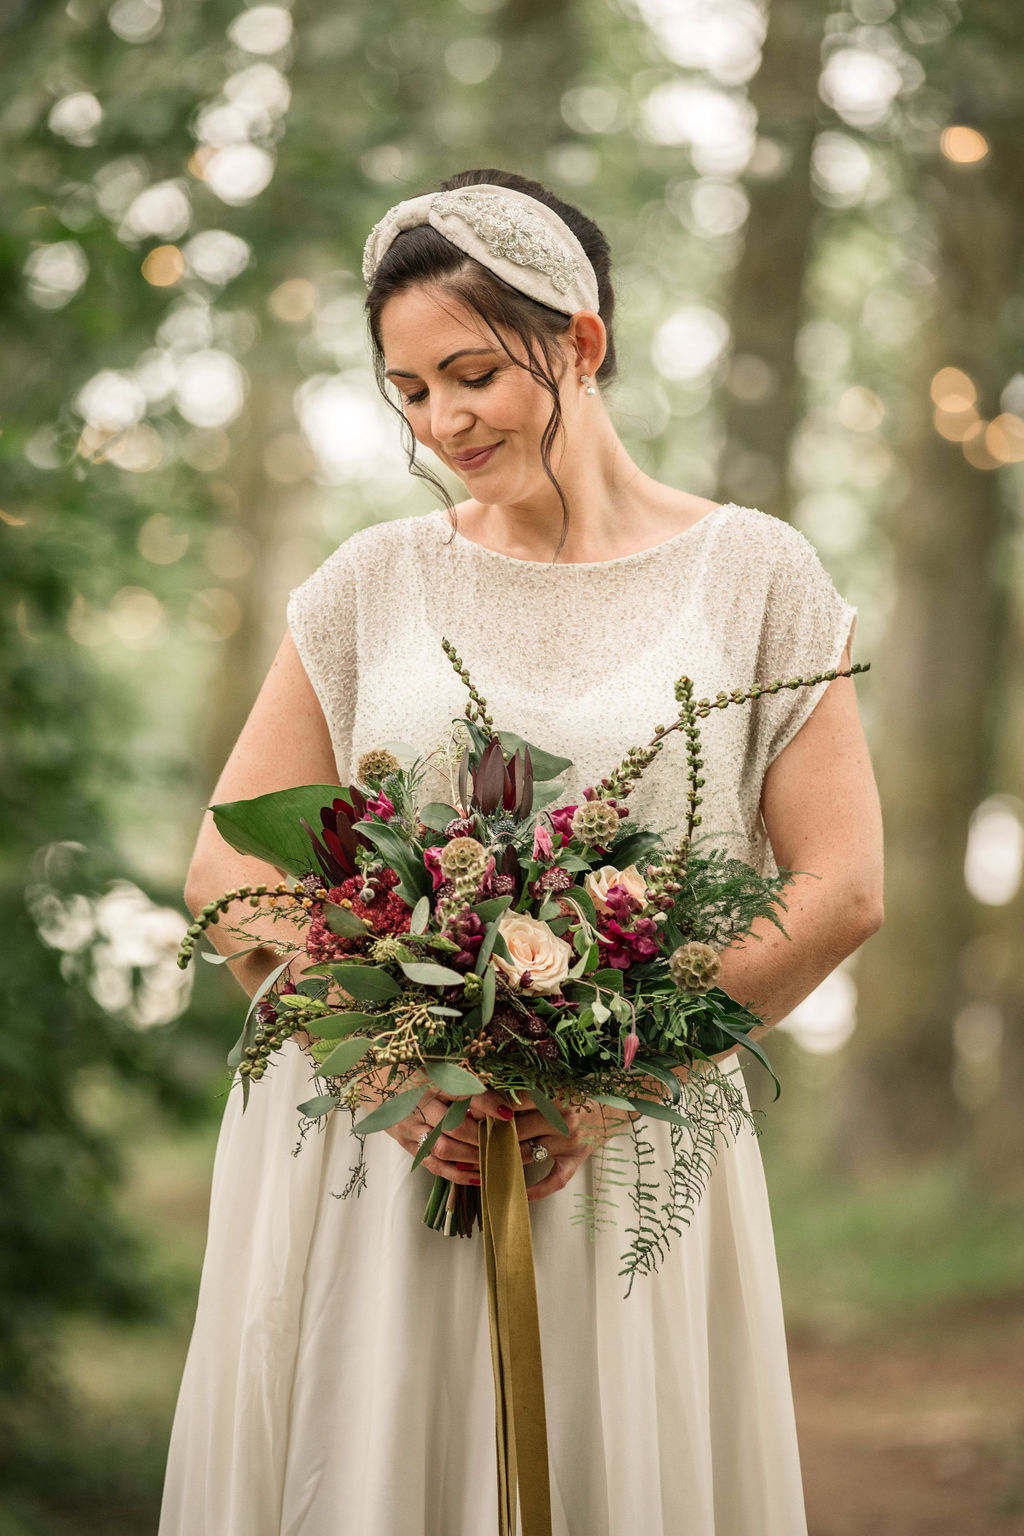 sustainable horsley hale wedding inspiration with Four Counties Awards, image credit Becky Harley Photography